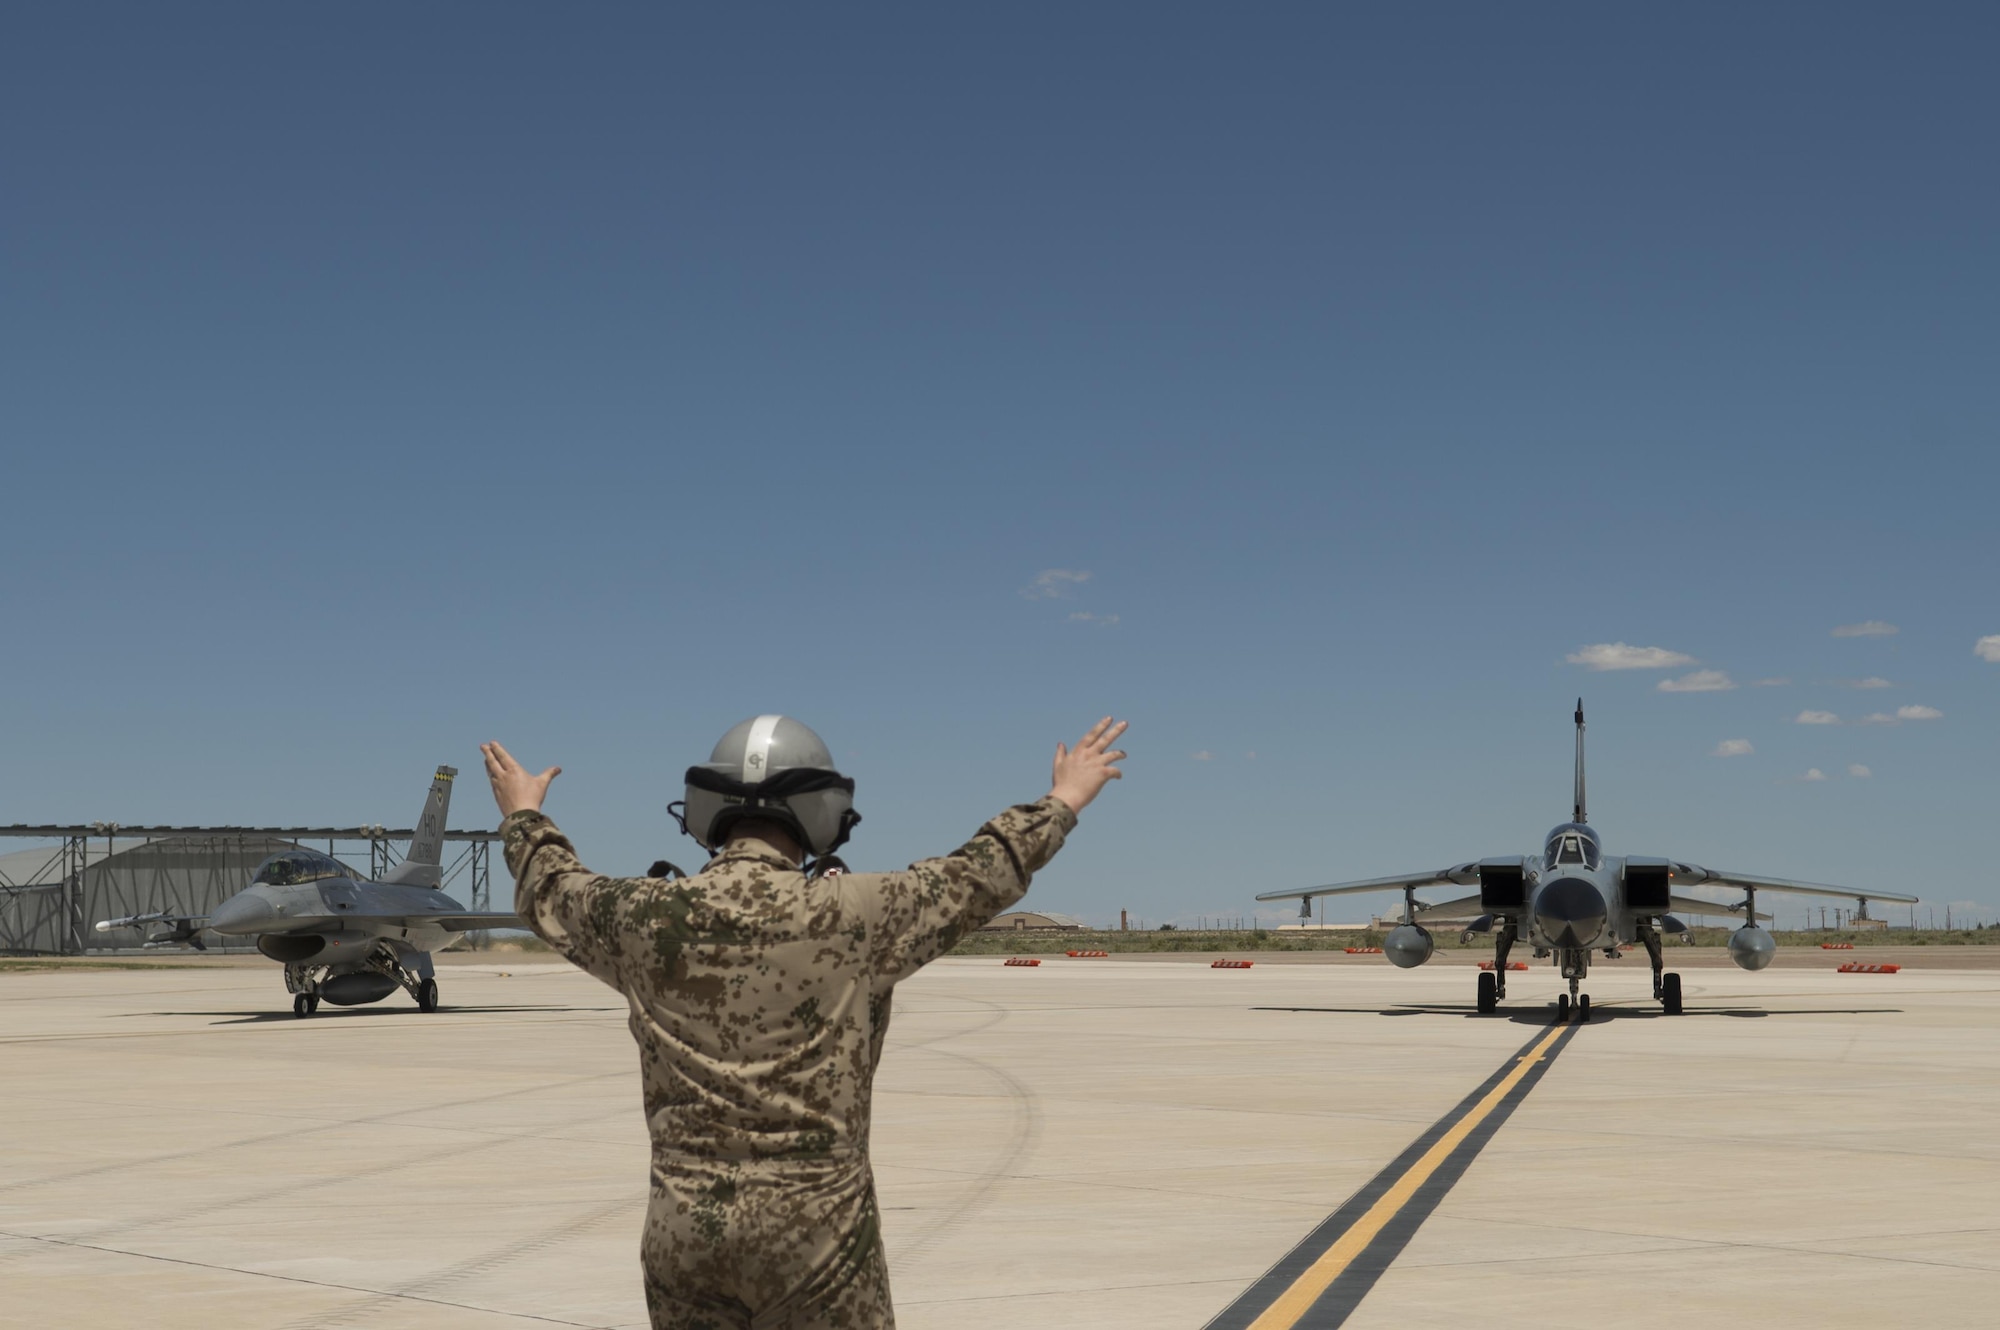 A German air force crew chief guides a GAF Tornado in with an F-16 Fighting Falcon assigned to the 314th Fighter Squadron during the last joint flying mission together here at Holloman Air Force Base, N.M., Aug. 17, 2017. The GAF has entered its final stage of departure, however they will not complete their departure until mid 2019. (U.S. Air Force photo by Tech. Sgt. Amanda Junk)